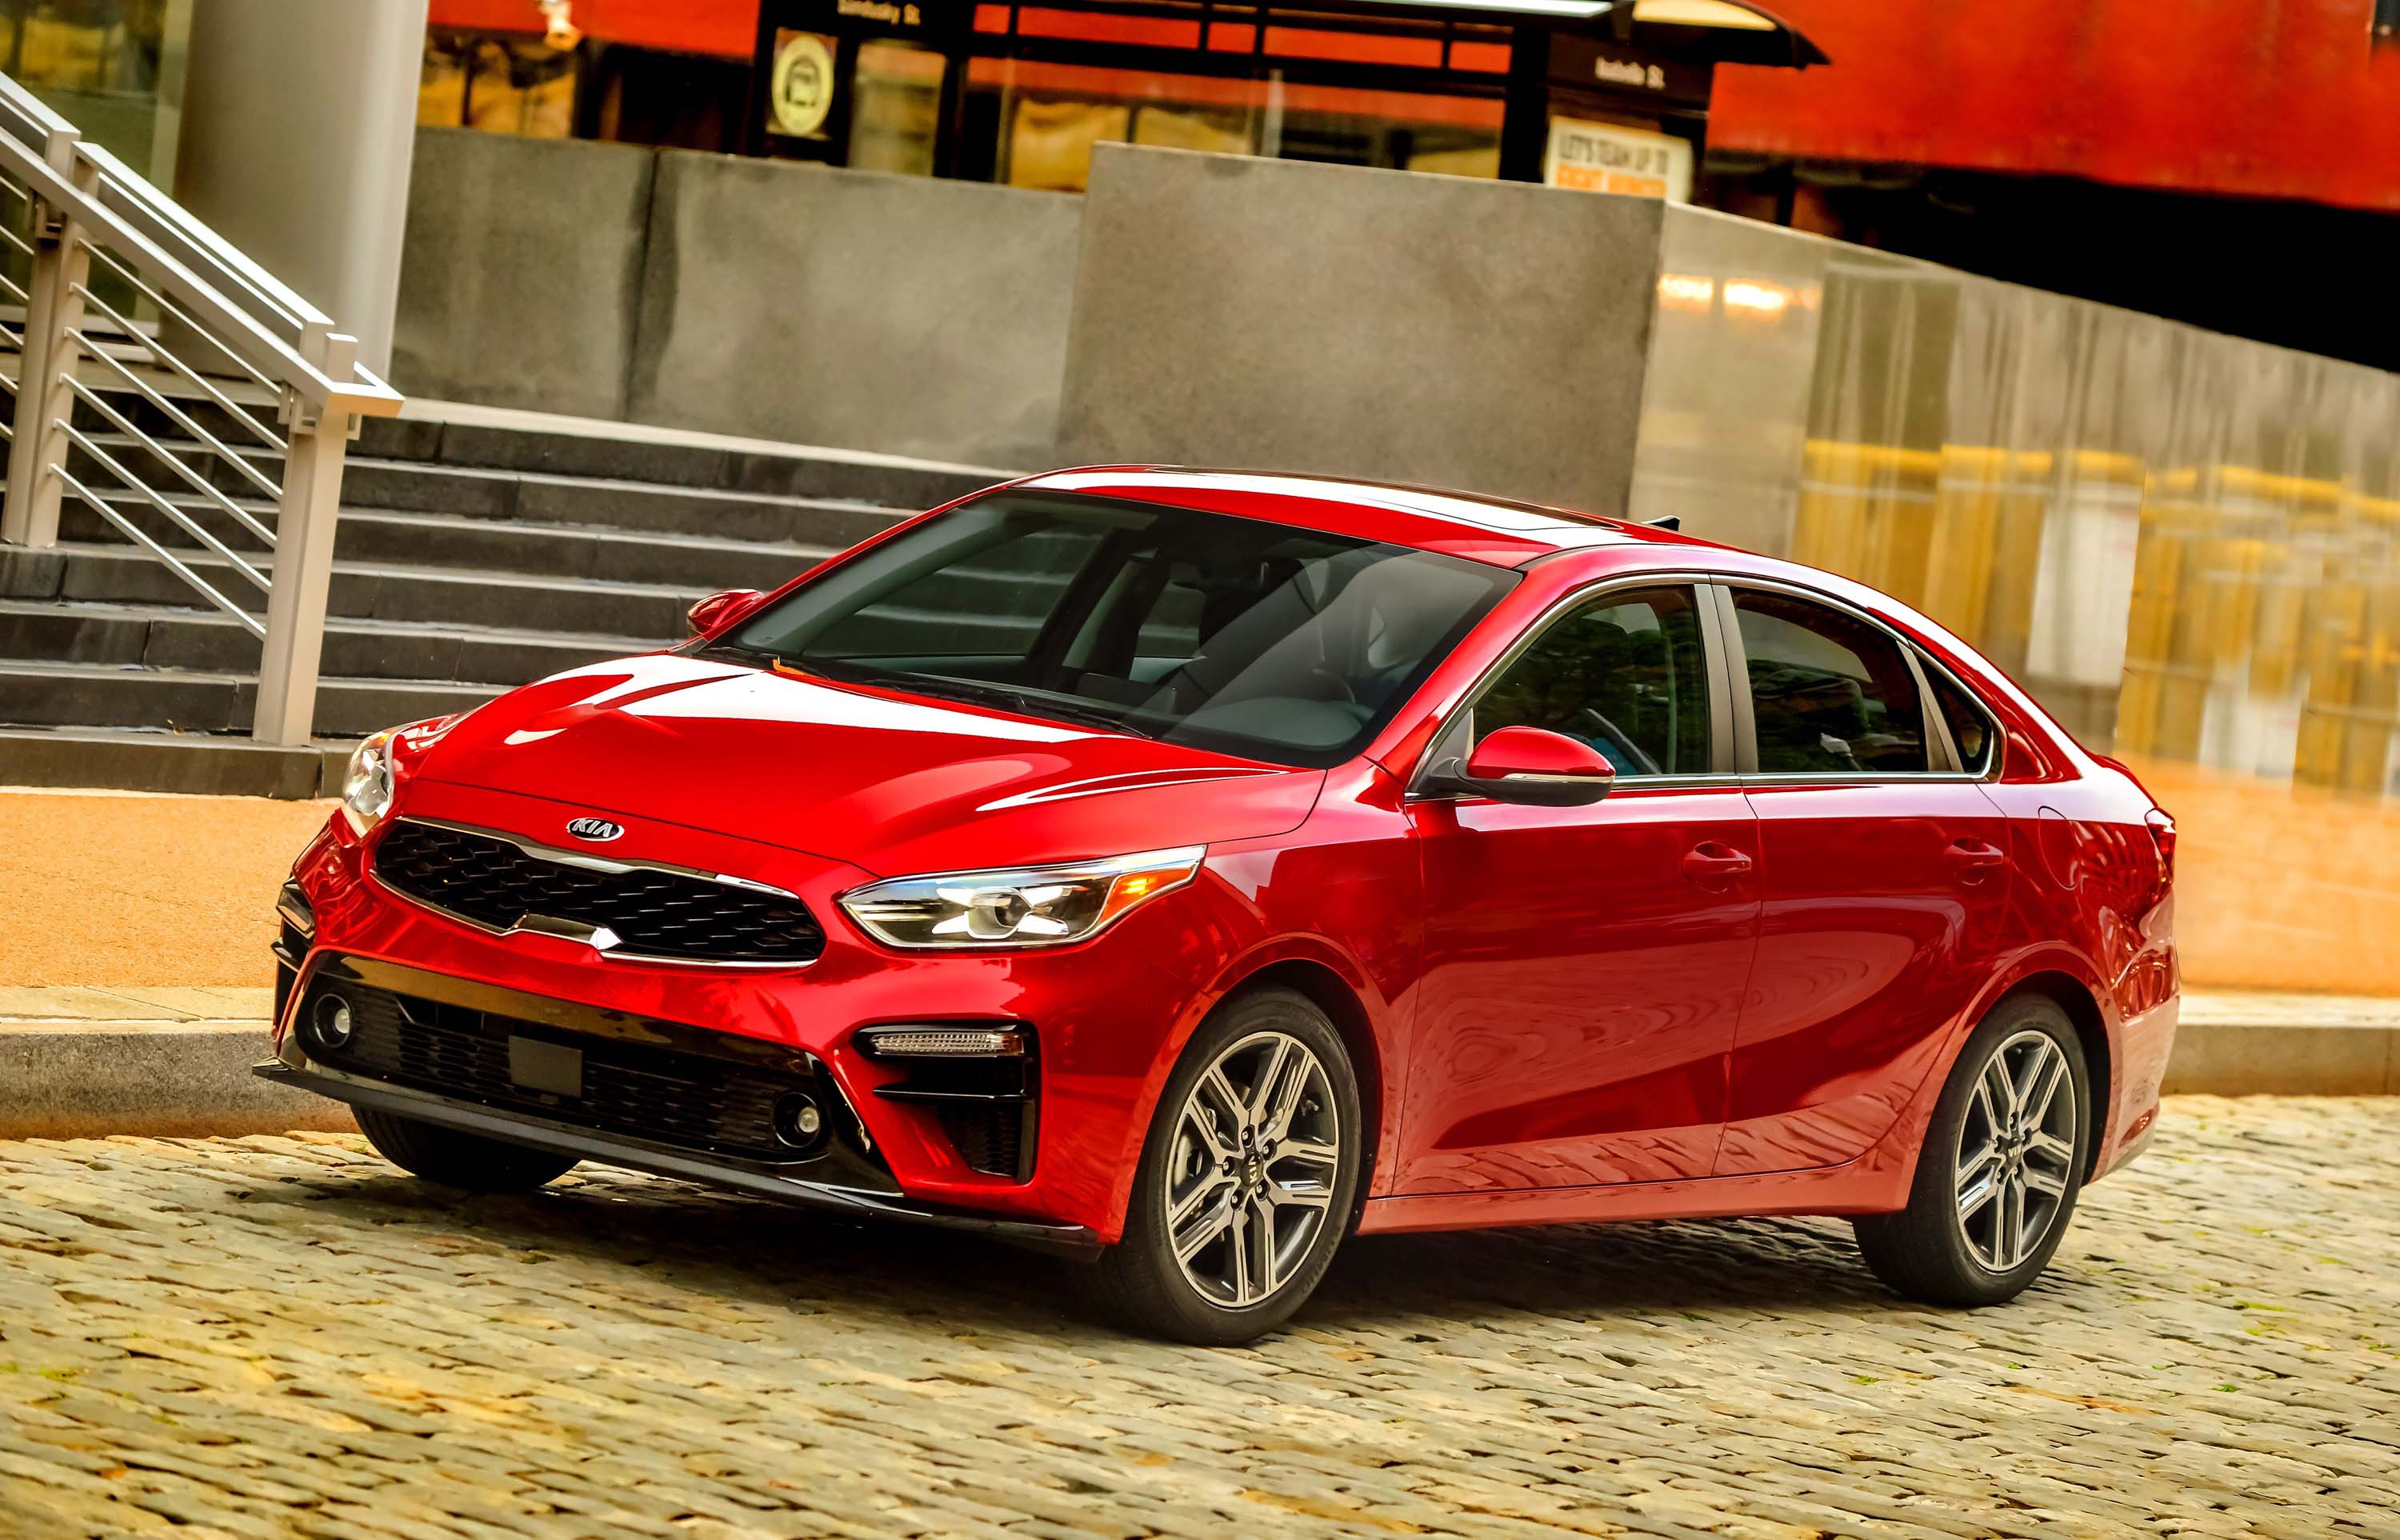 Kia Forte Review, Ratings, Specs, Prices, and Photo Car Connection